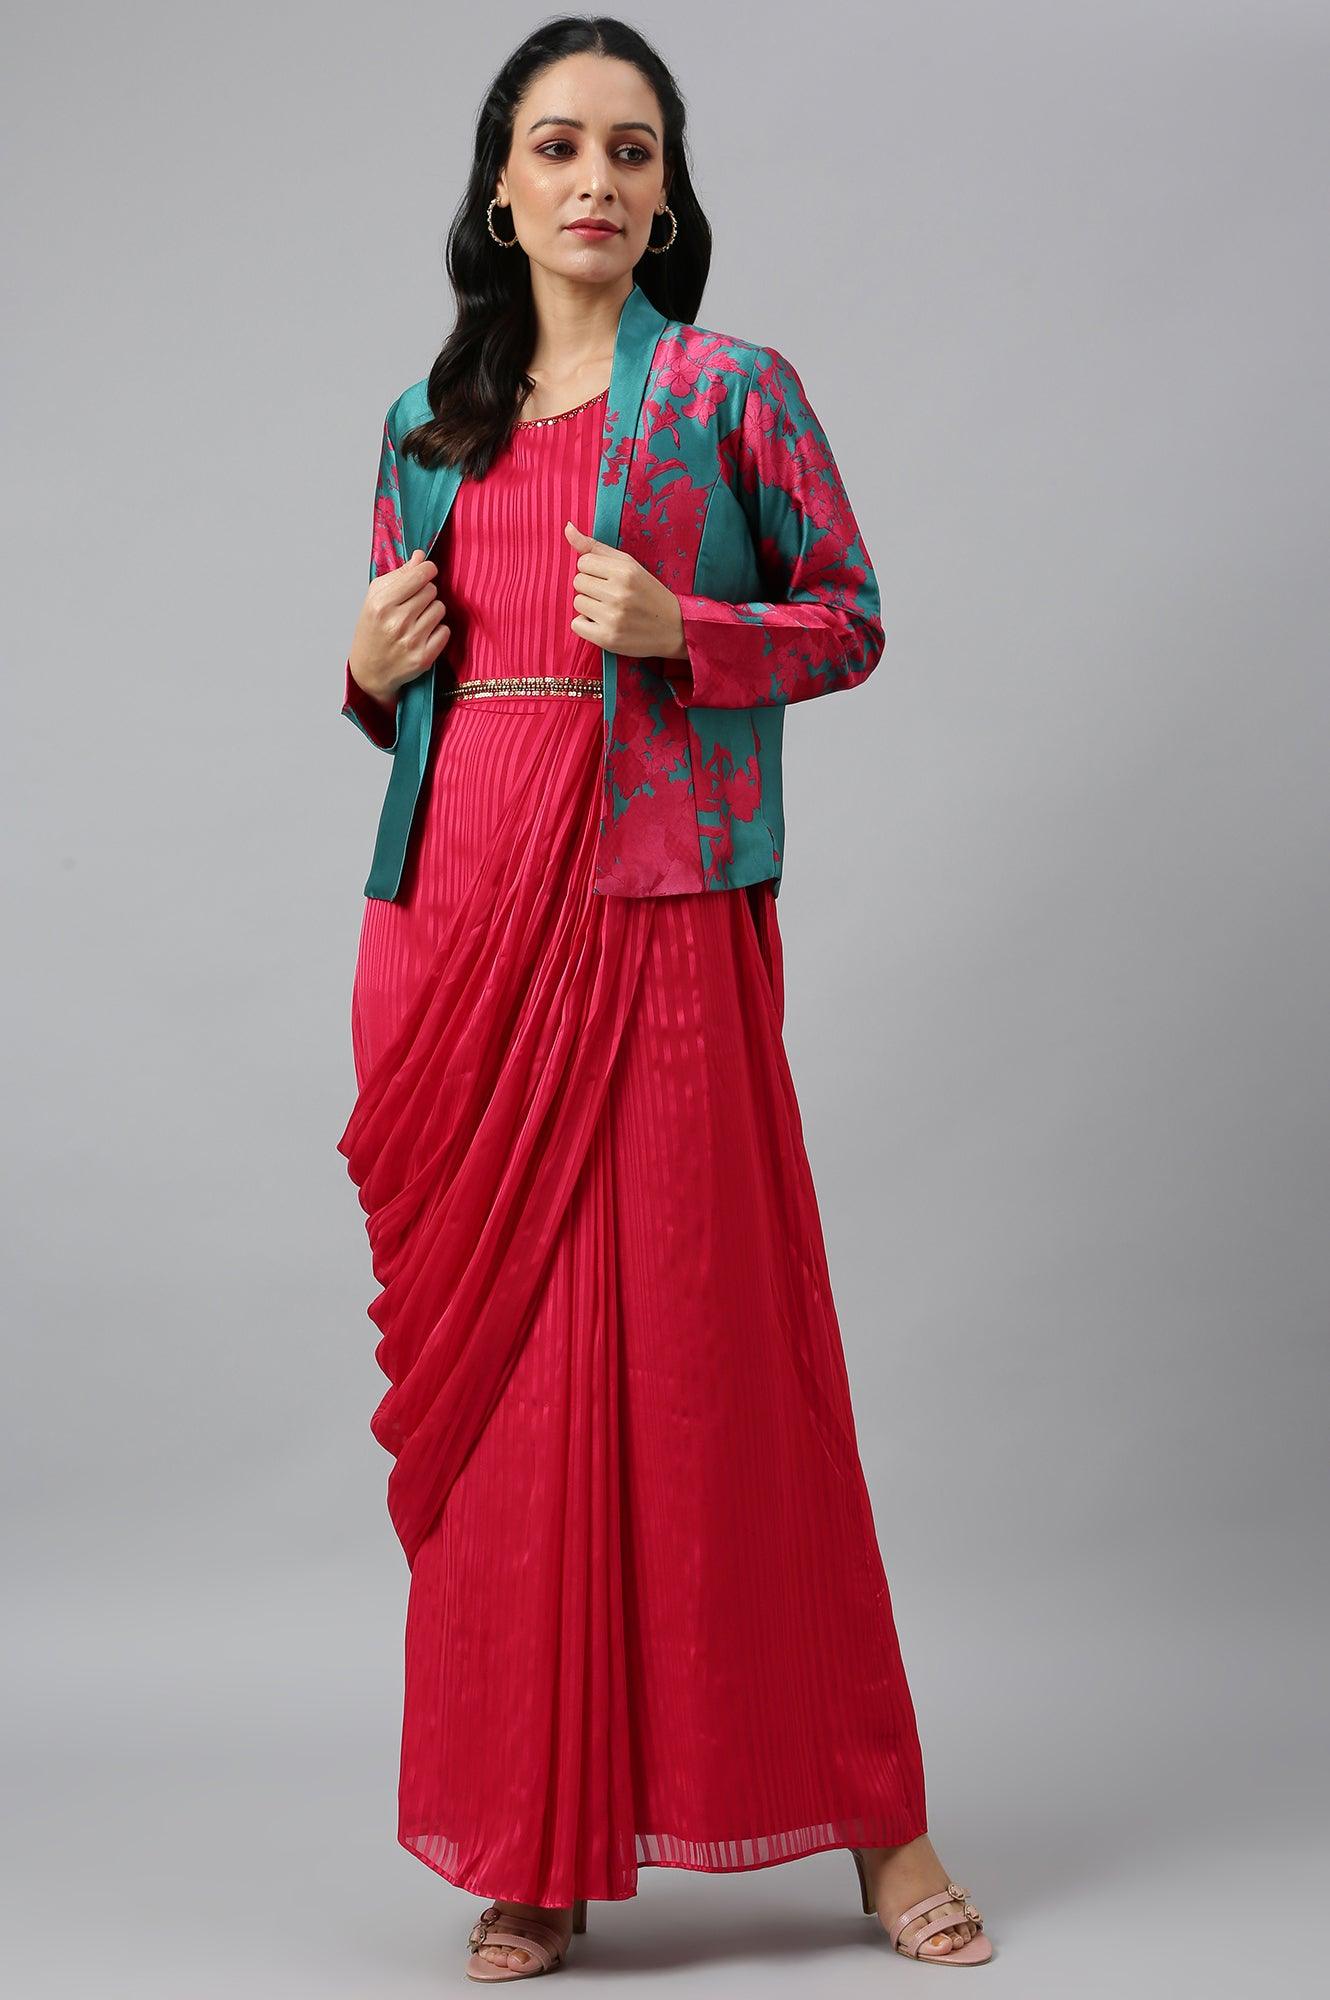 Coral Red Sleeveless Predrape Saree Dress With Belt And Tailored Jacket Set - wforwoman